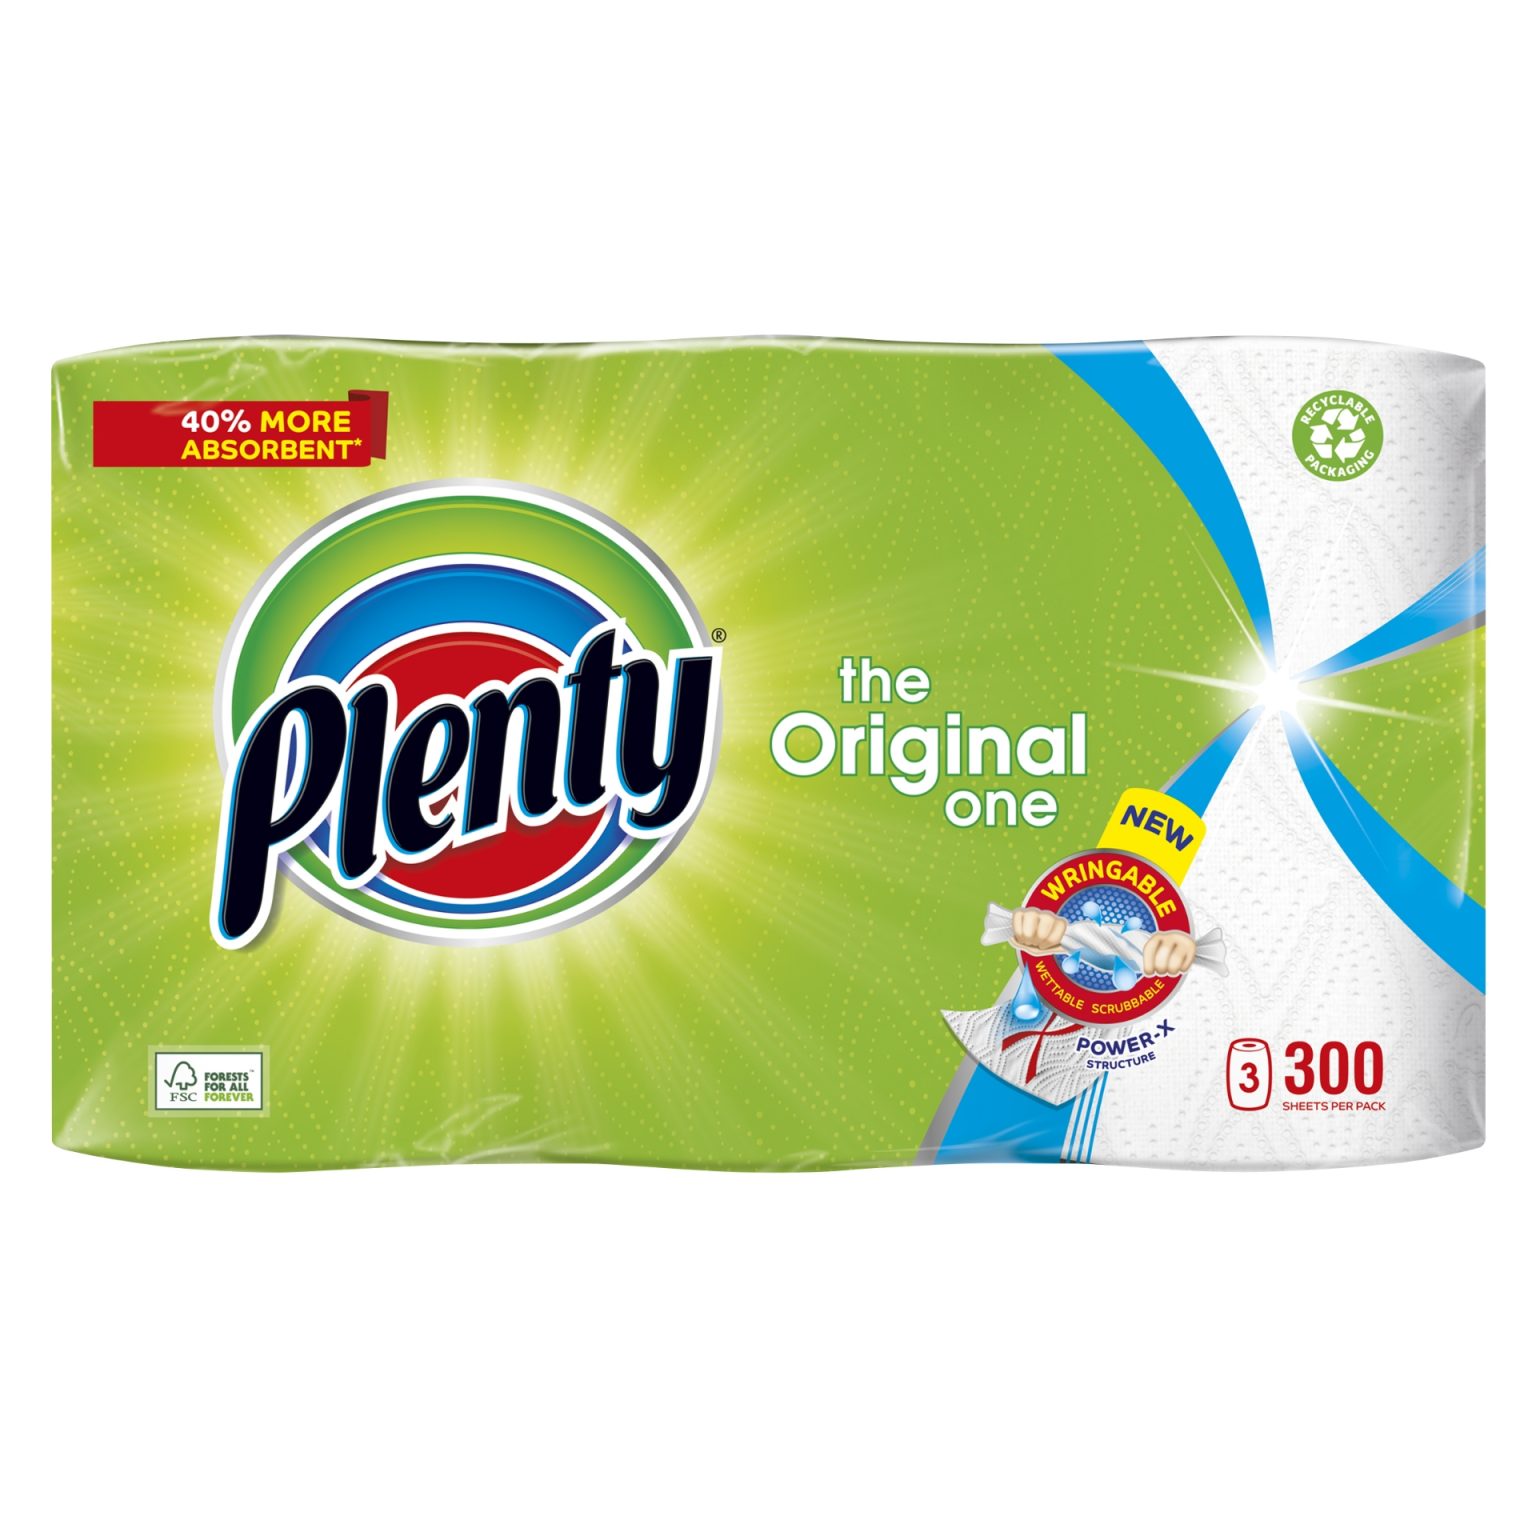 Plenty Kitchen paper for all your wiping tasks at home or work